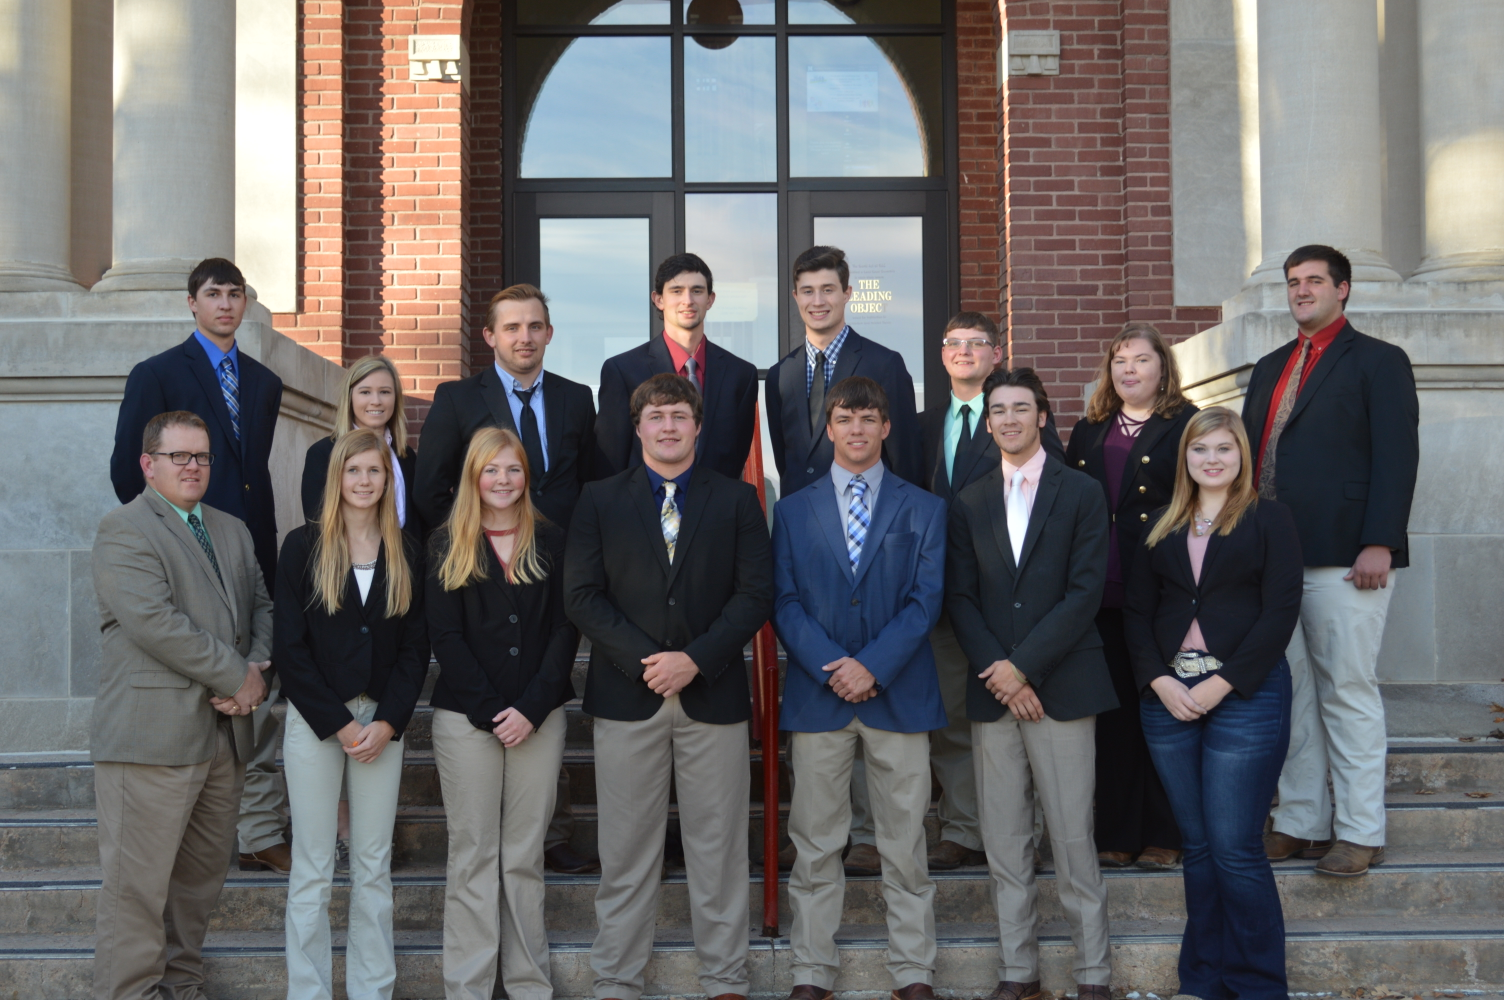 Livestock Judging Team students in a November, 2018, photo at NCTA Ag Hall are, back row: (L to R) Dean Fleer, assistant coach; Colbey Luebbe, Grant Romshek, Remy Mansour, Will Moeller, Peyton McCord, Rachel Miller, and Nathan Lashley, assistant coach. Front row: (L to R) Dr. Doug Smith, coach; Tiffany Dickau, Emily Riley, Seth Racicky, Camden Wilke, Garrett Lapp, and Maisie Kennicutt. (Tina Smith/NCTA Photo)